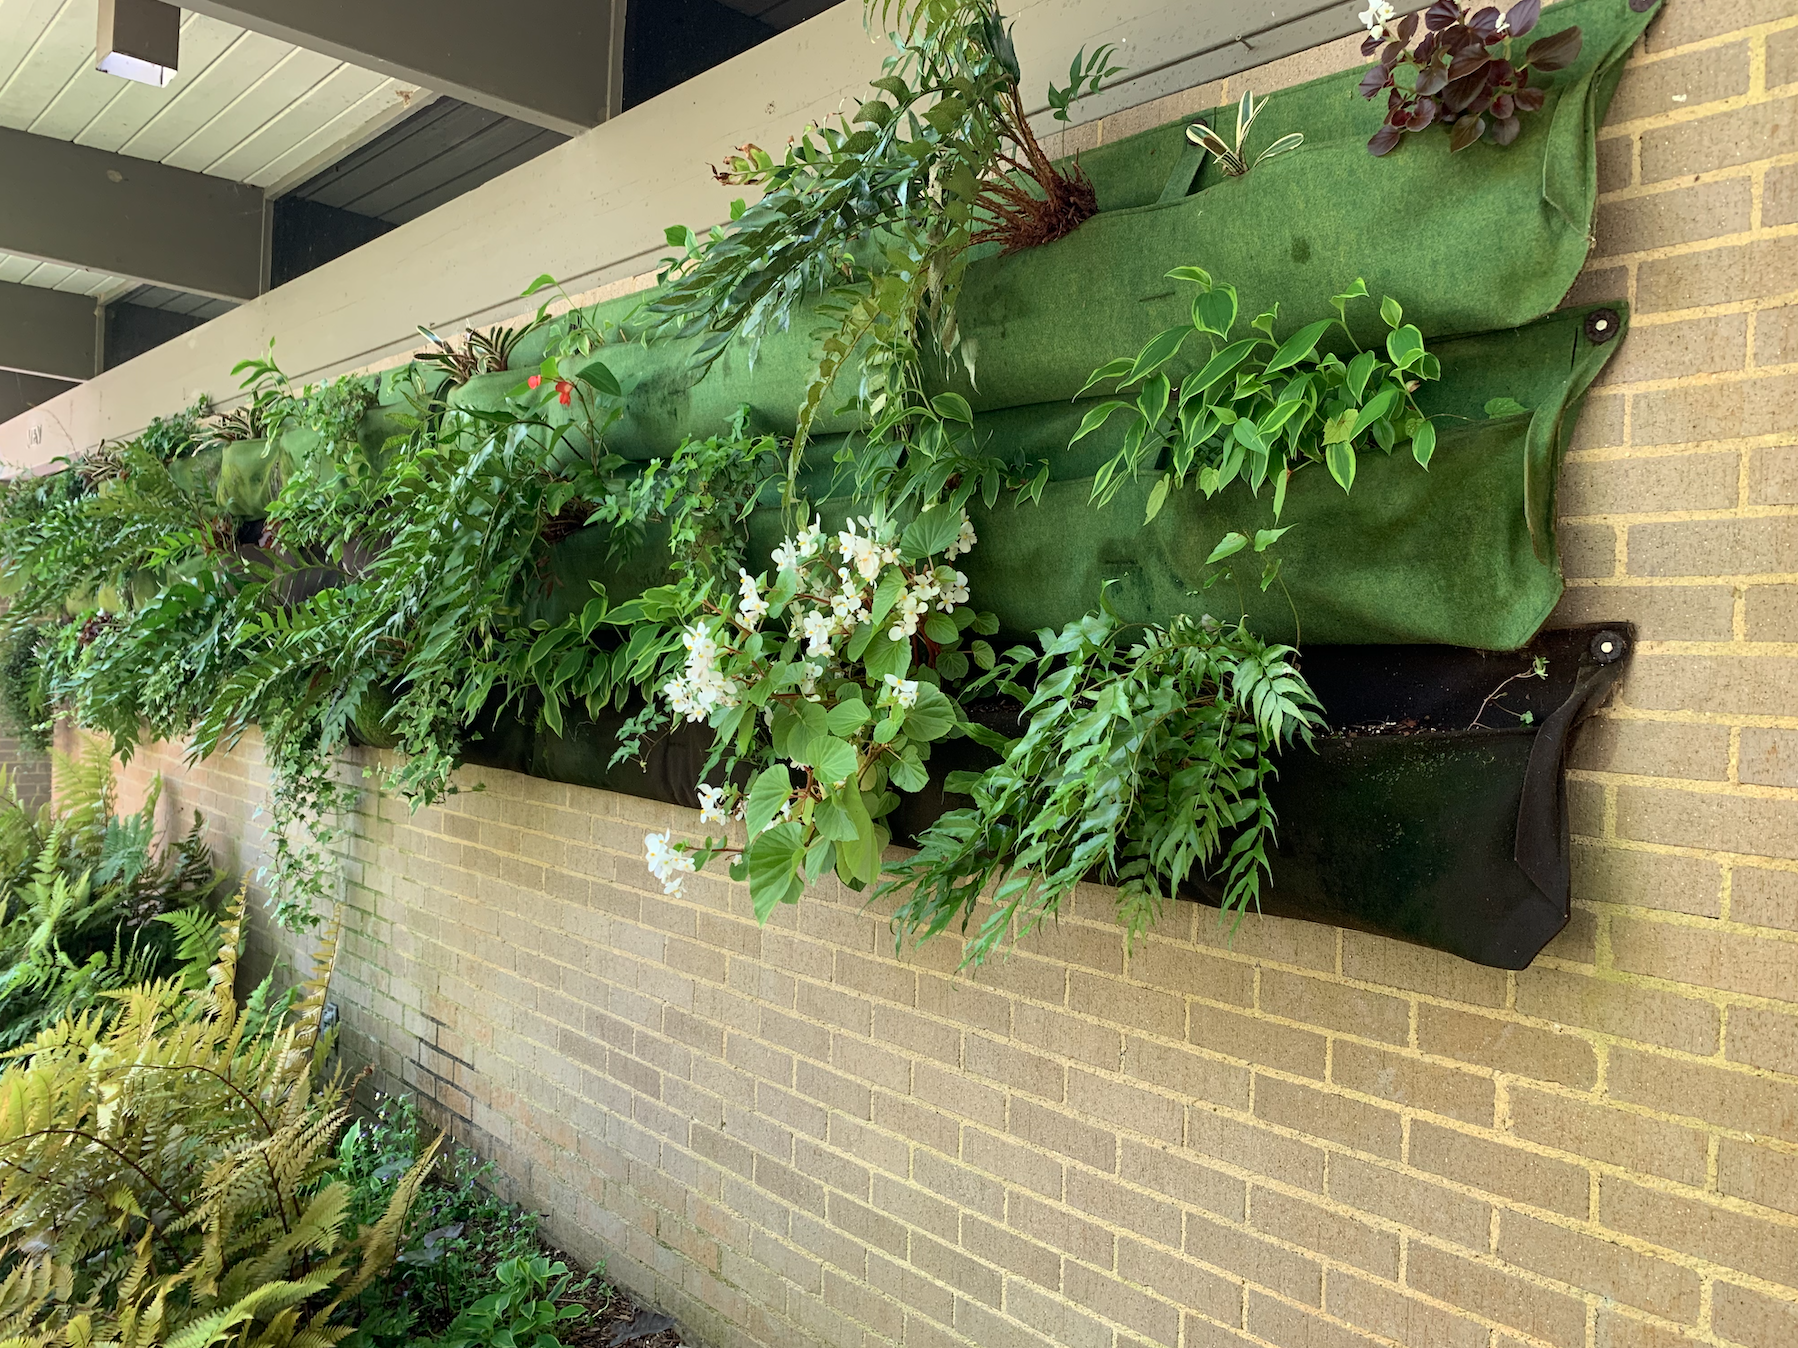 A hanging container display against a brick wall with plants spilling over. The display has three rows of fabric containers. The top row is light green, the middle is dark green, and the bottom is black. 